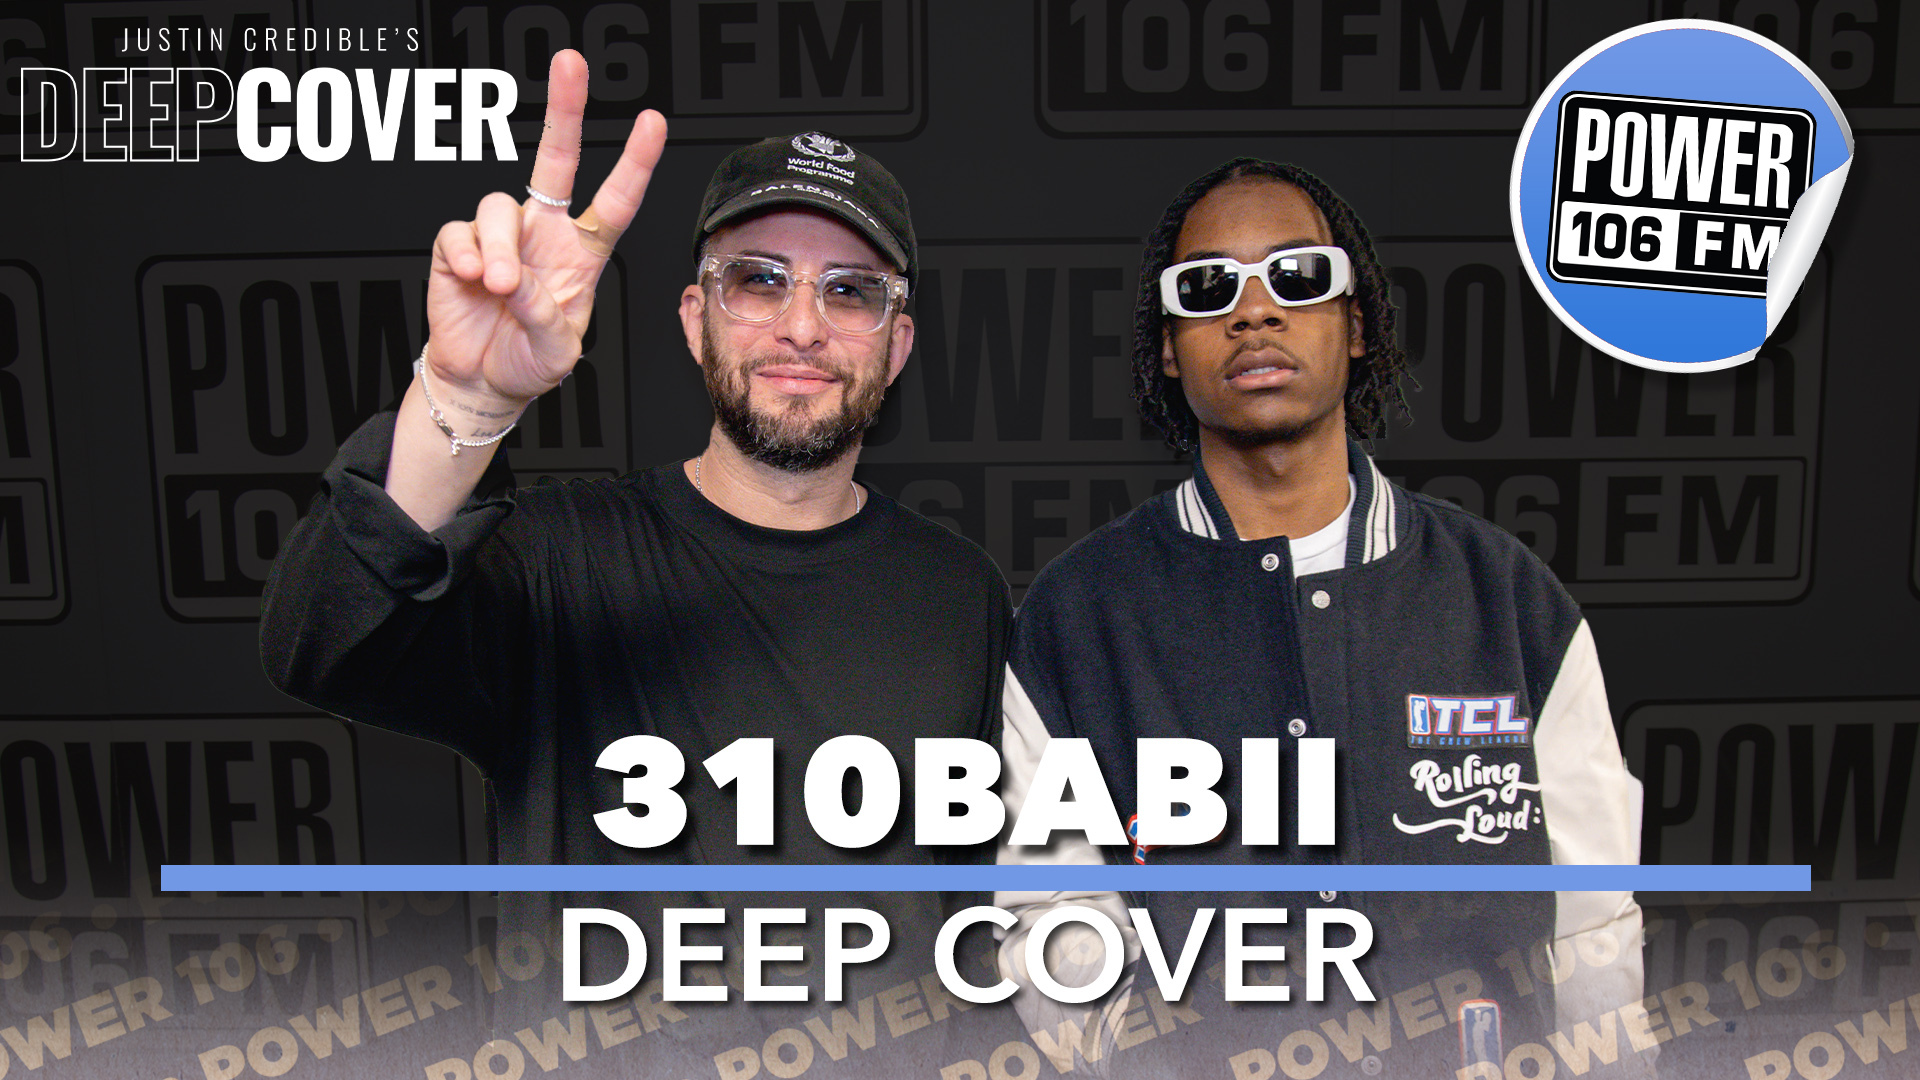 310babii Covers Chief Keef’s “Faneto” | Justin Credible’s DEEP COVER